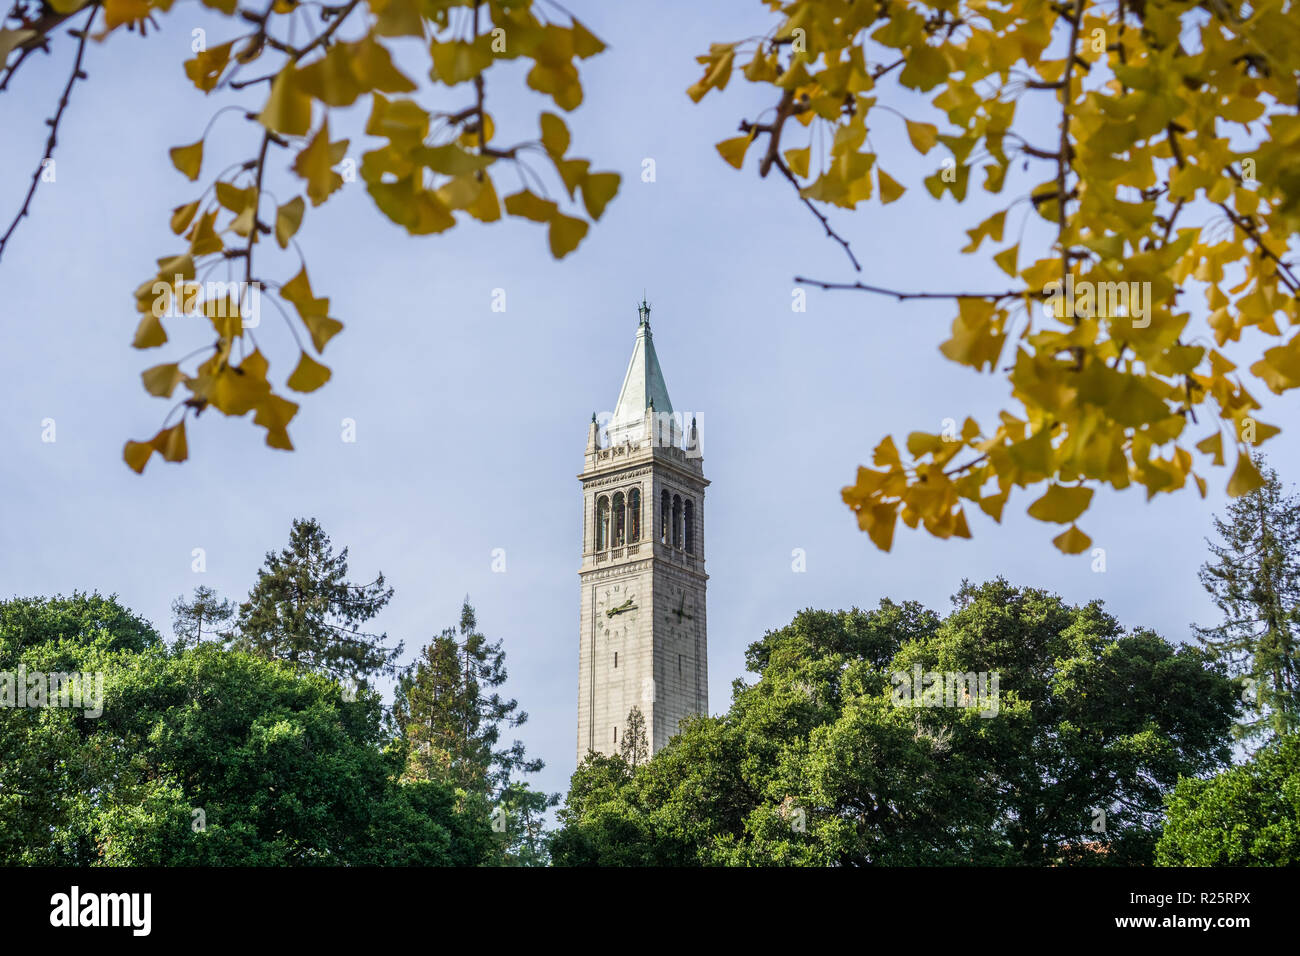 The top of Sather tower (The Campanile) rising above the trees and framed by ginkgo autumn colored leaves, on a blue sky background, UC Berkeley, San  Stock Photo